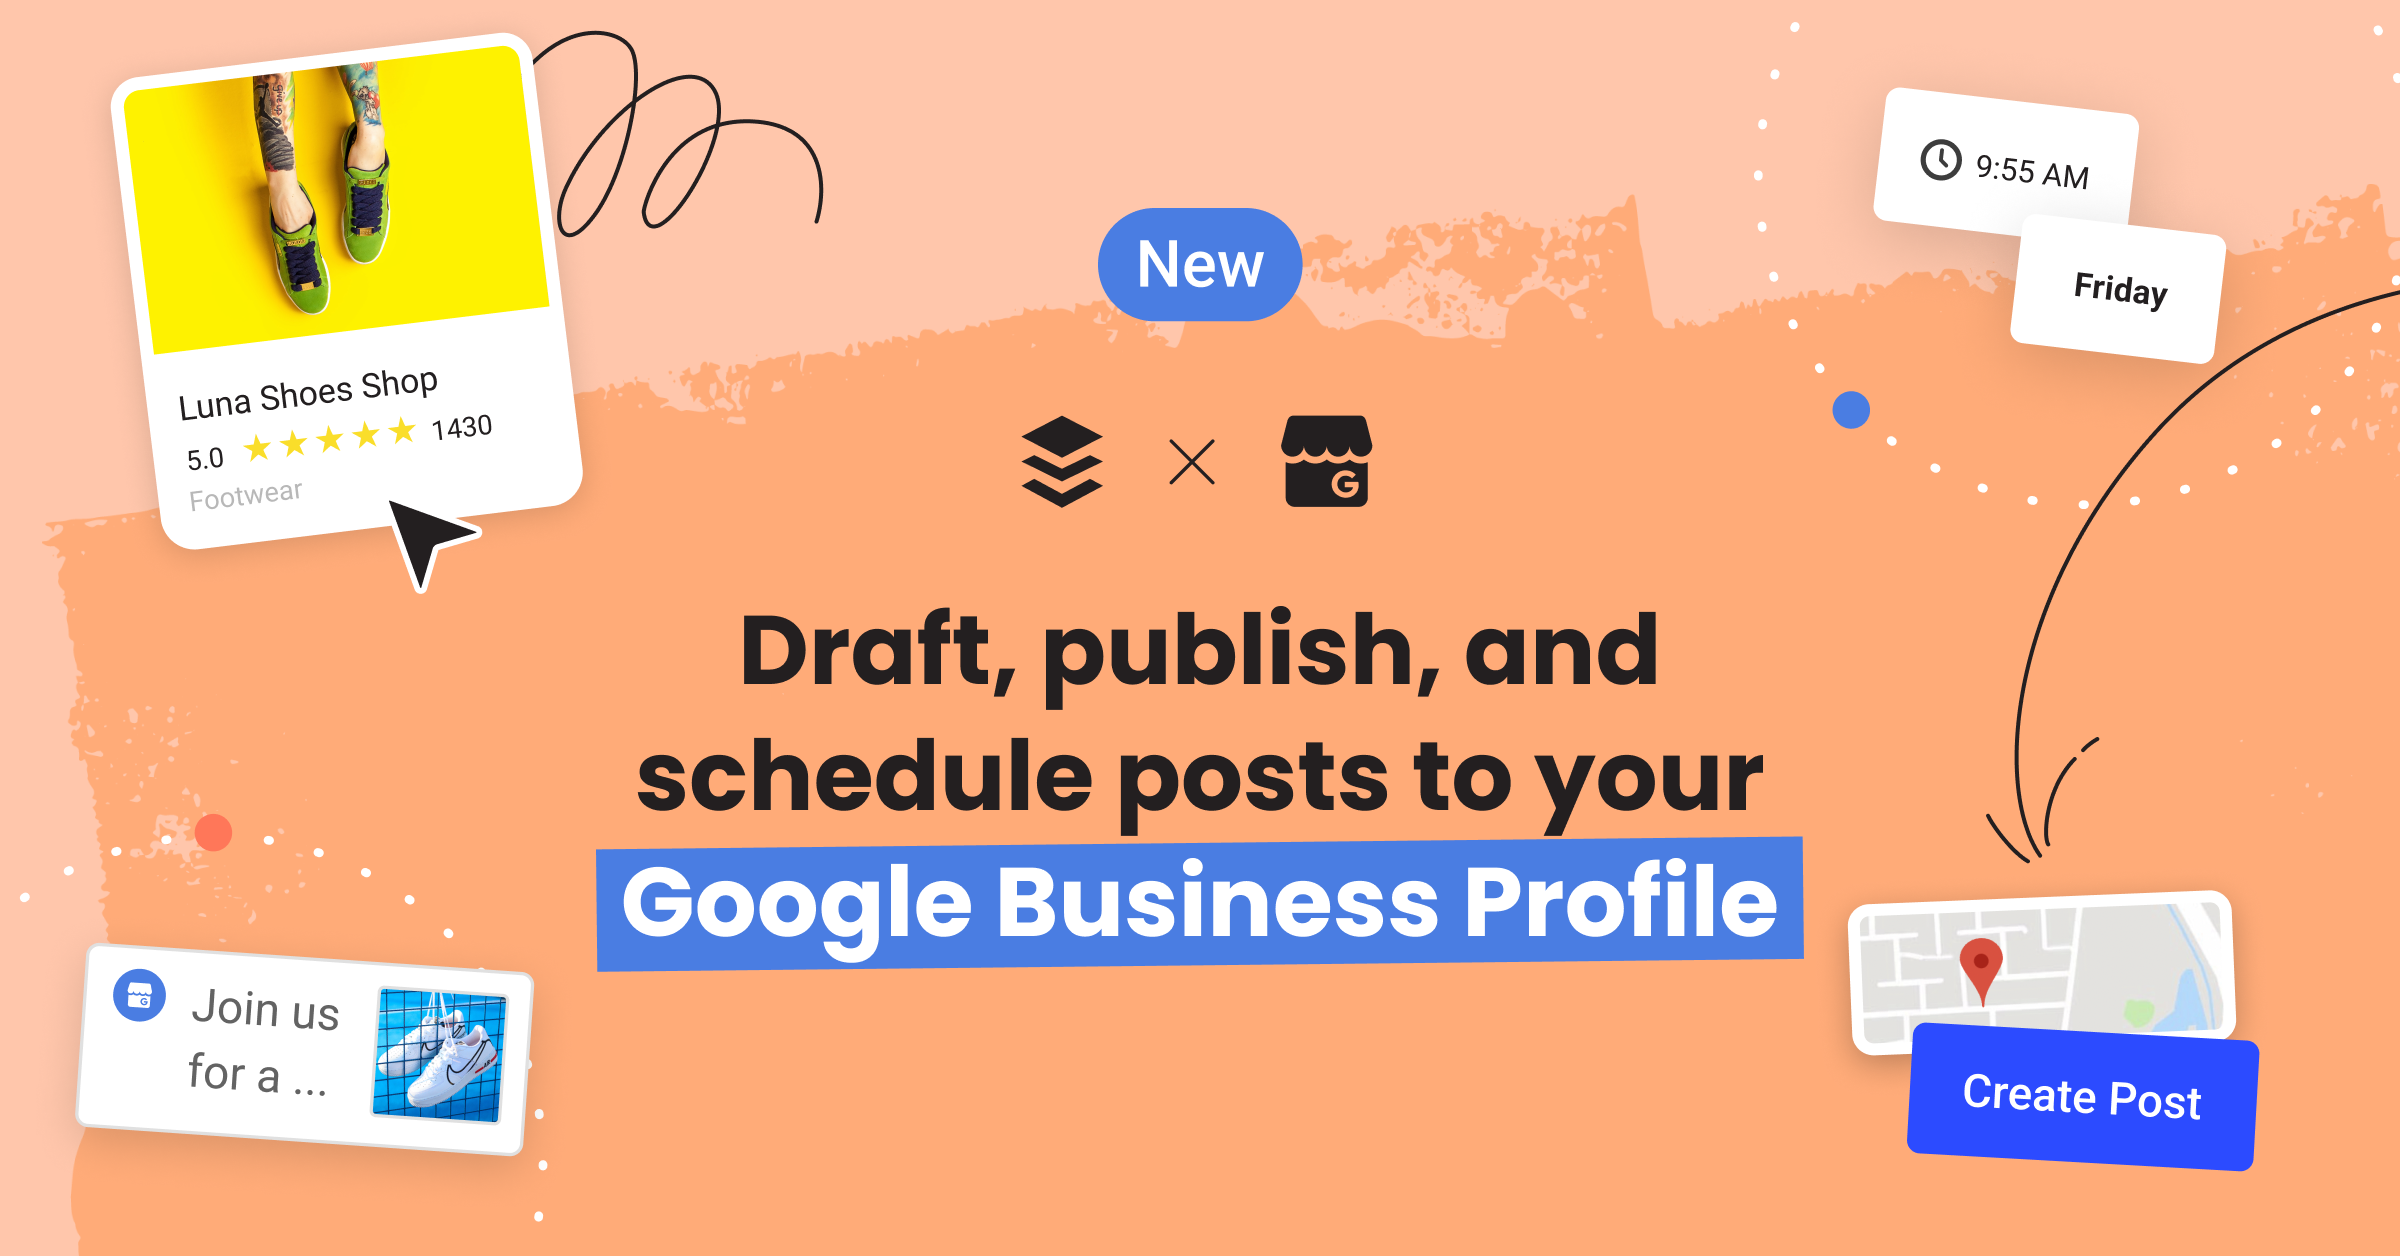 Draft, publish, and schedule posts to your Google Business Profile 